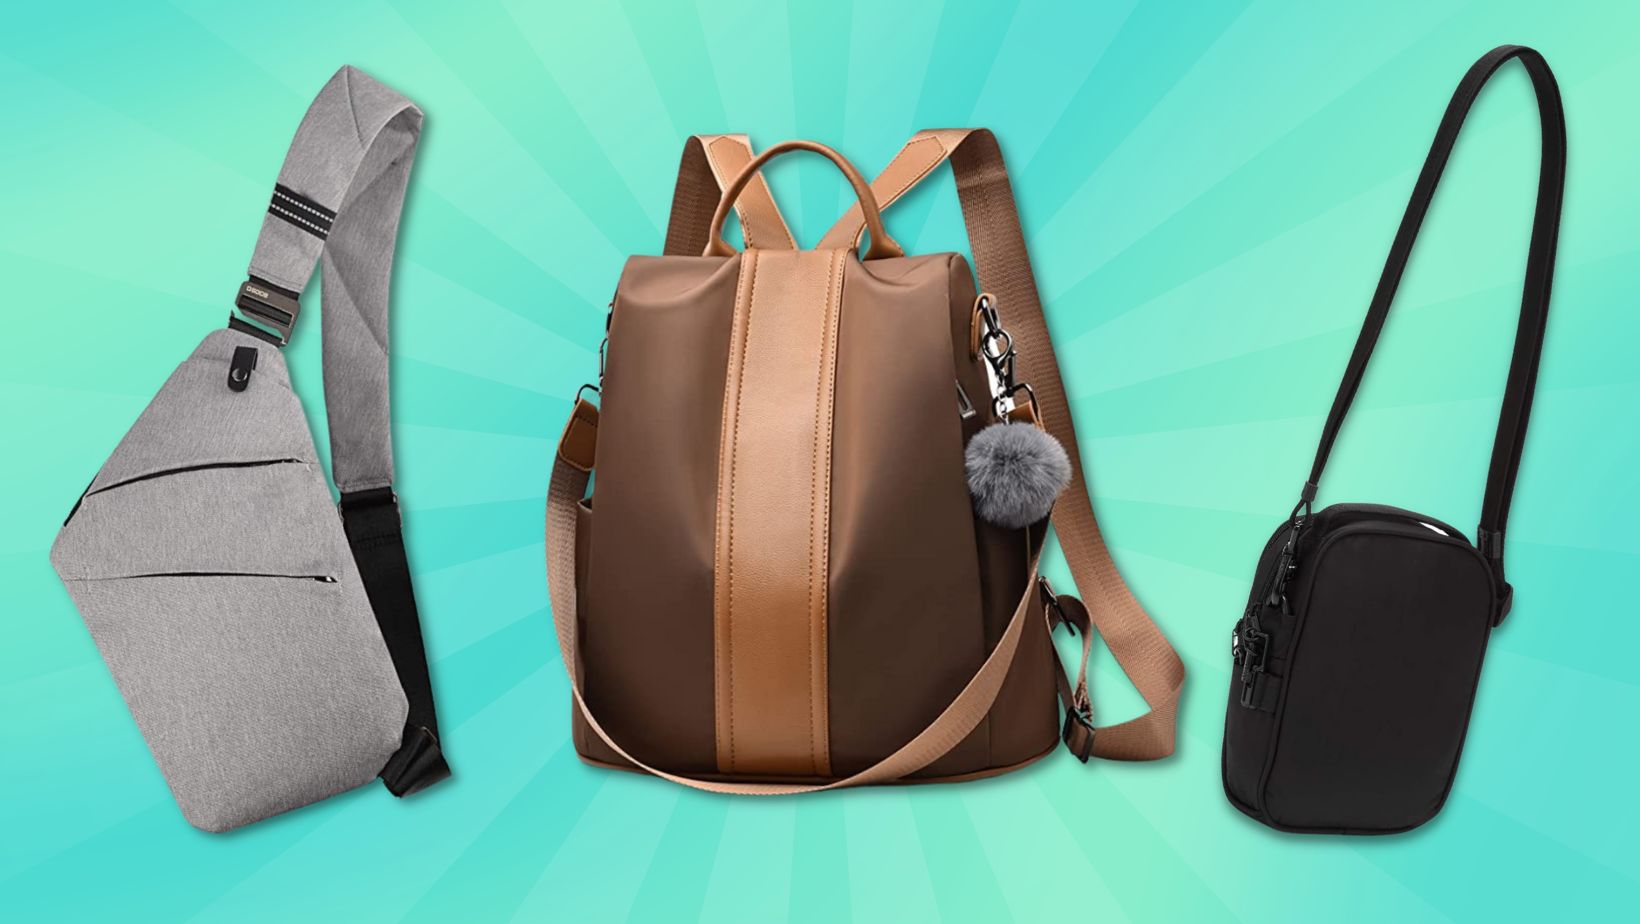 The Best Anti Theft Travel Bags and Accessories in 2020 | The Planet D